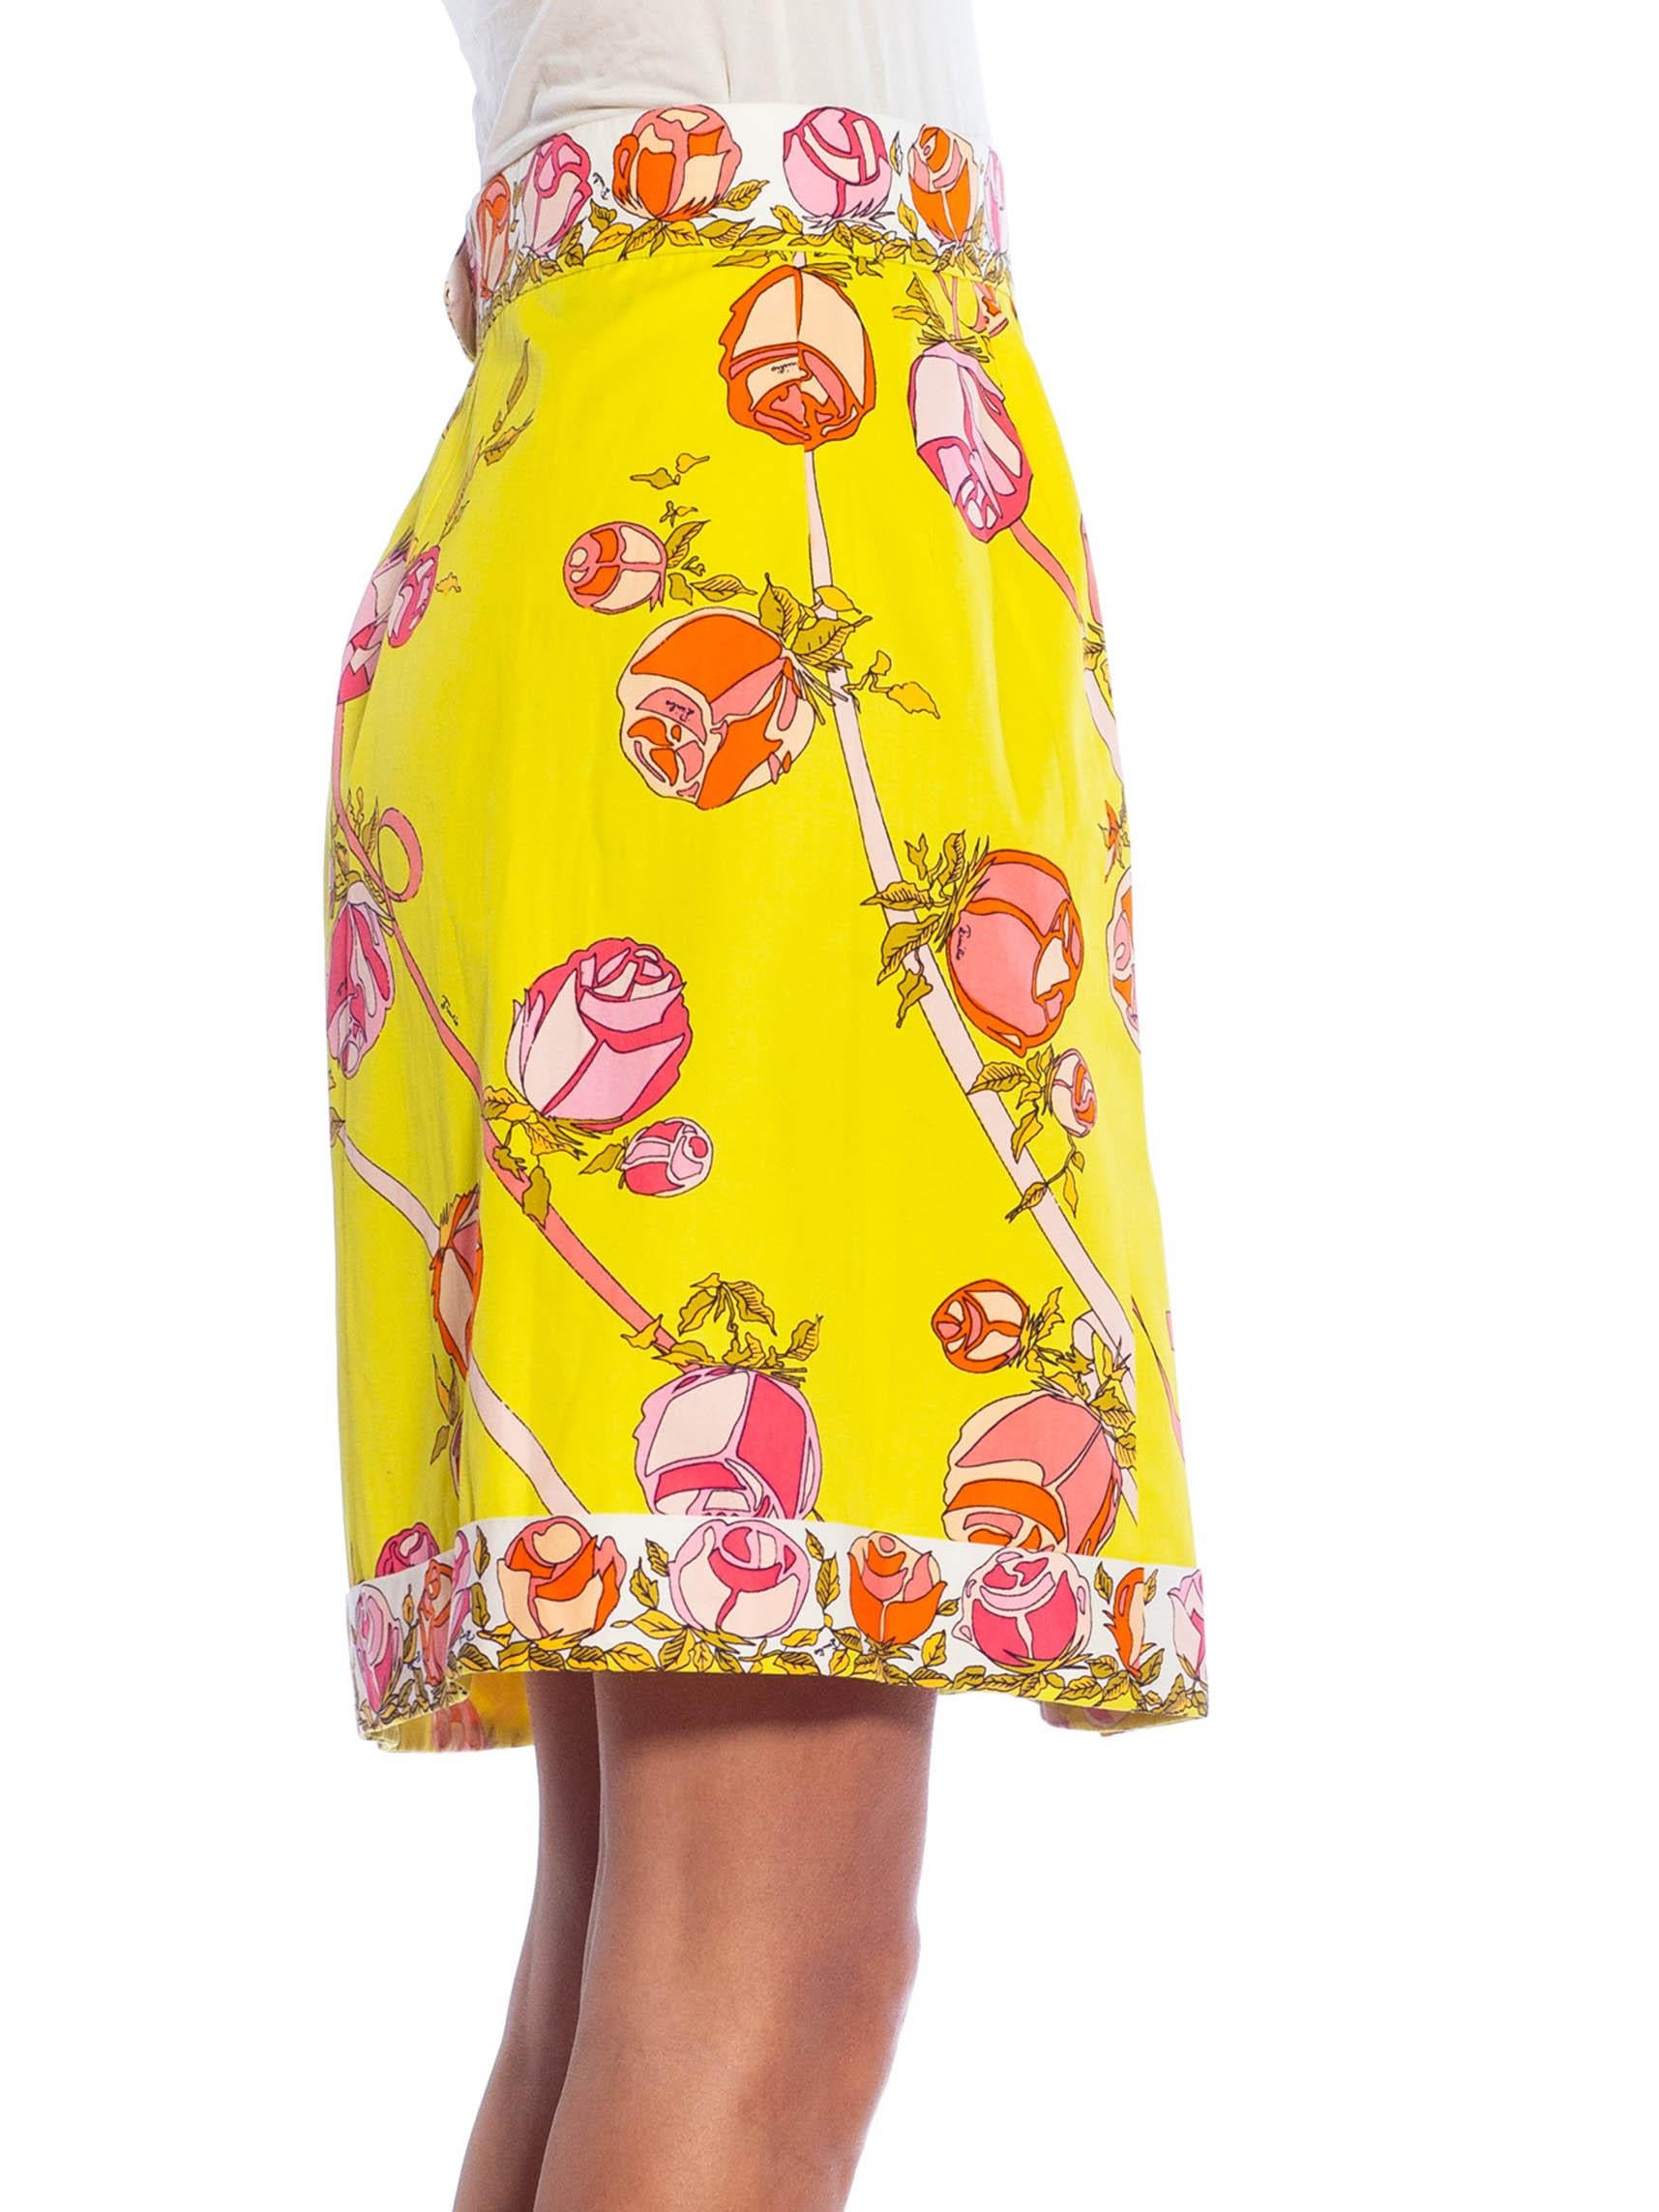 Made in Italy EMILIO PUCCI Yellow & Pink Cotton Floral Skirt 